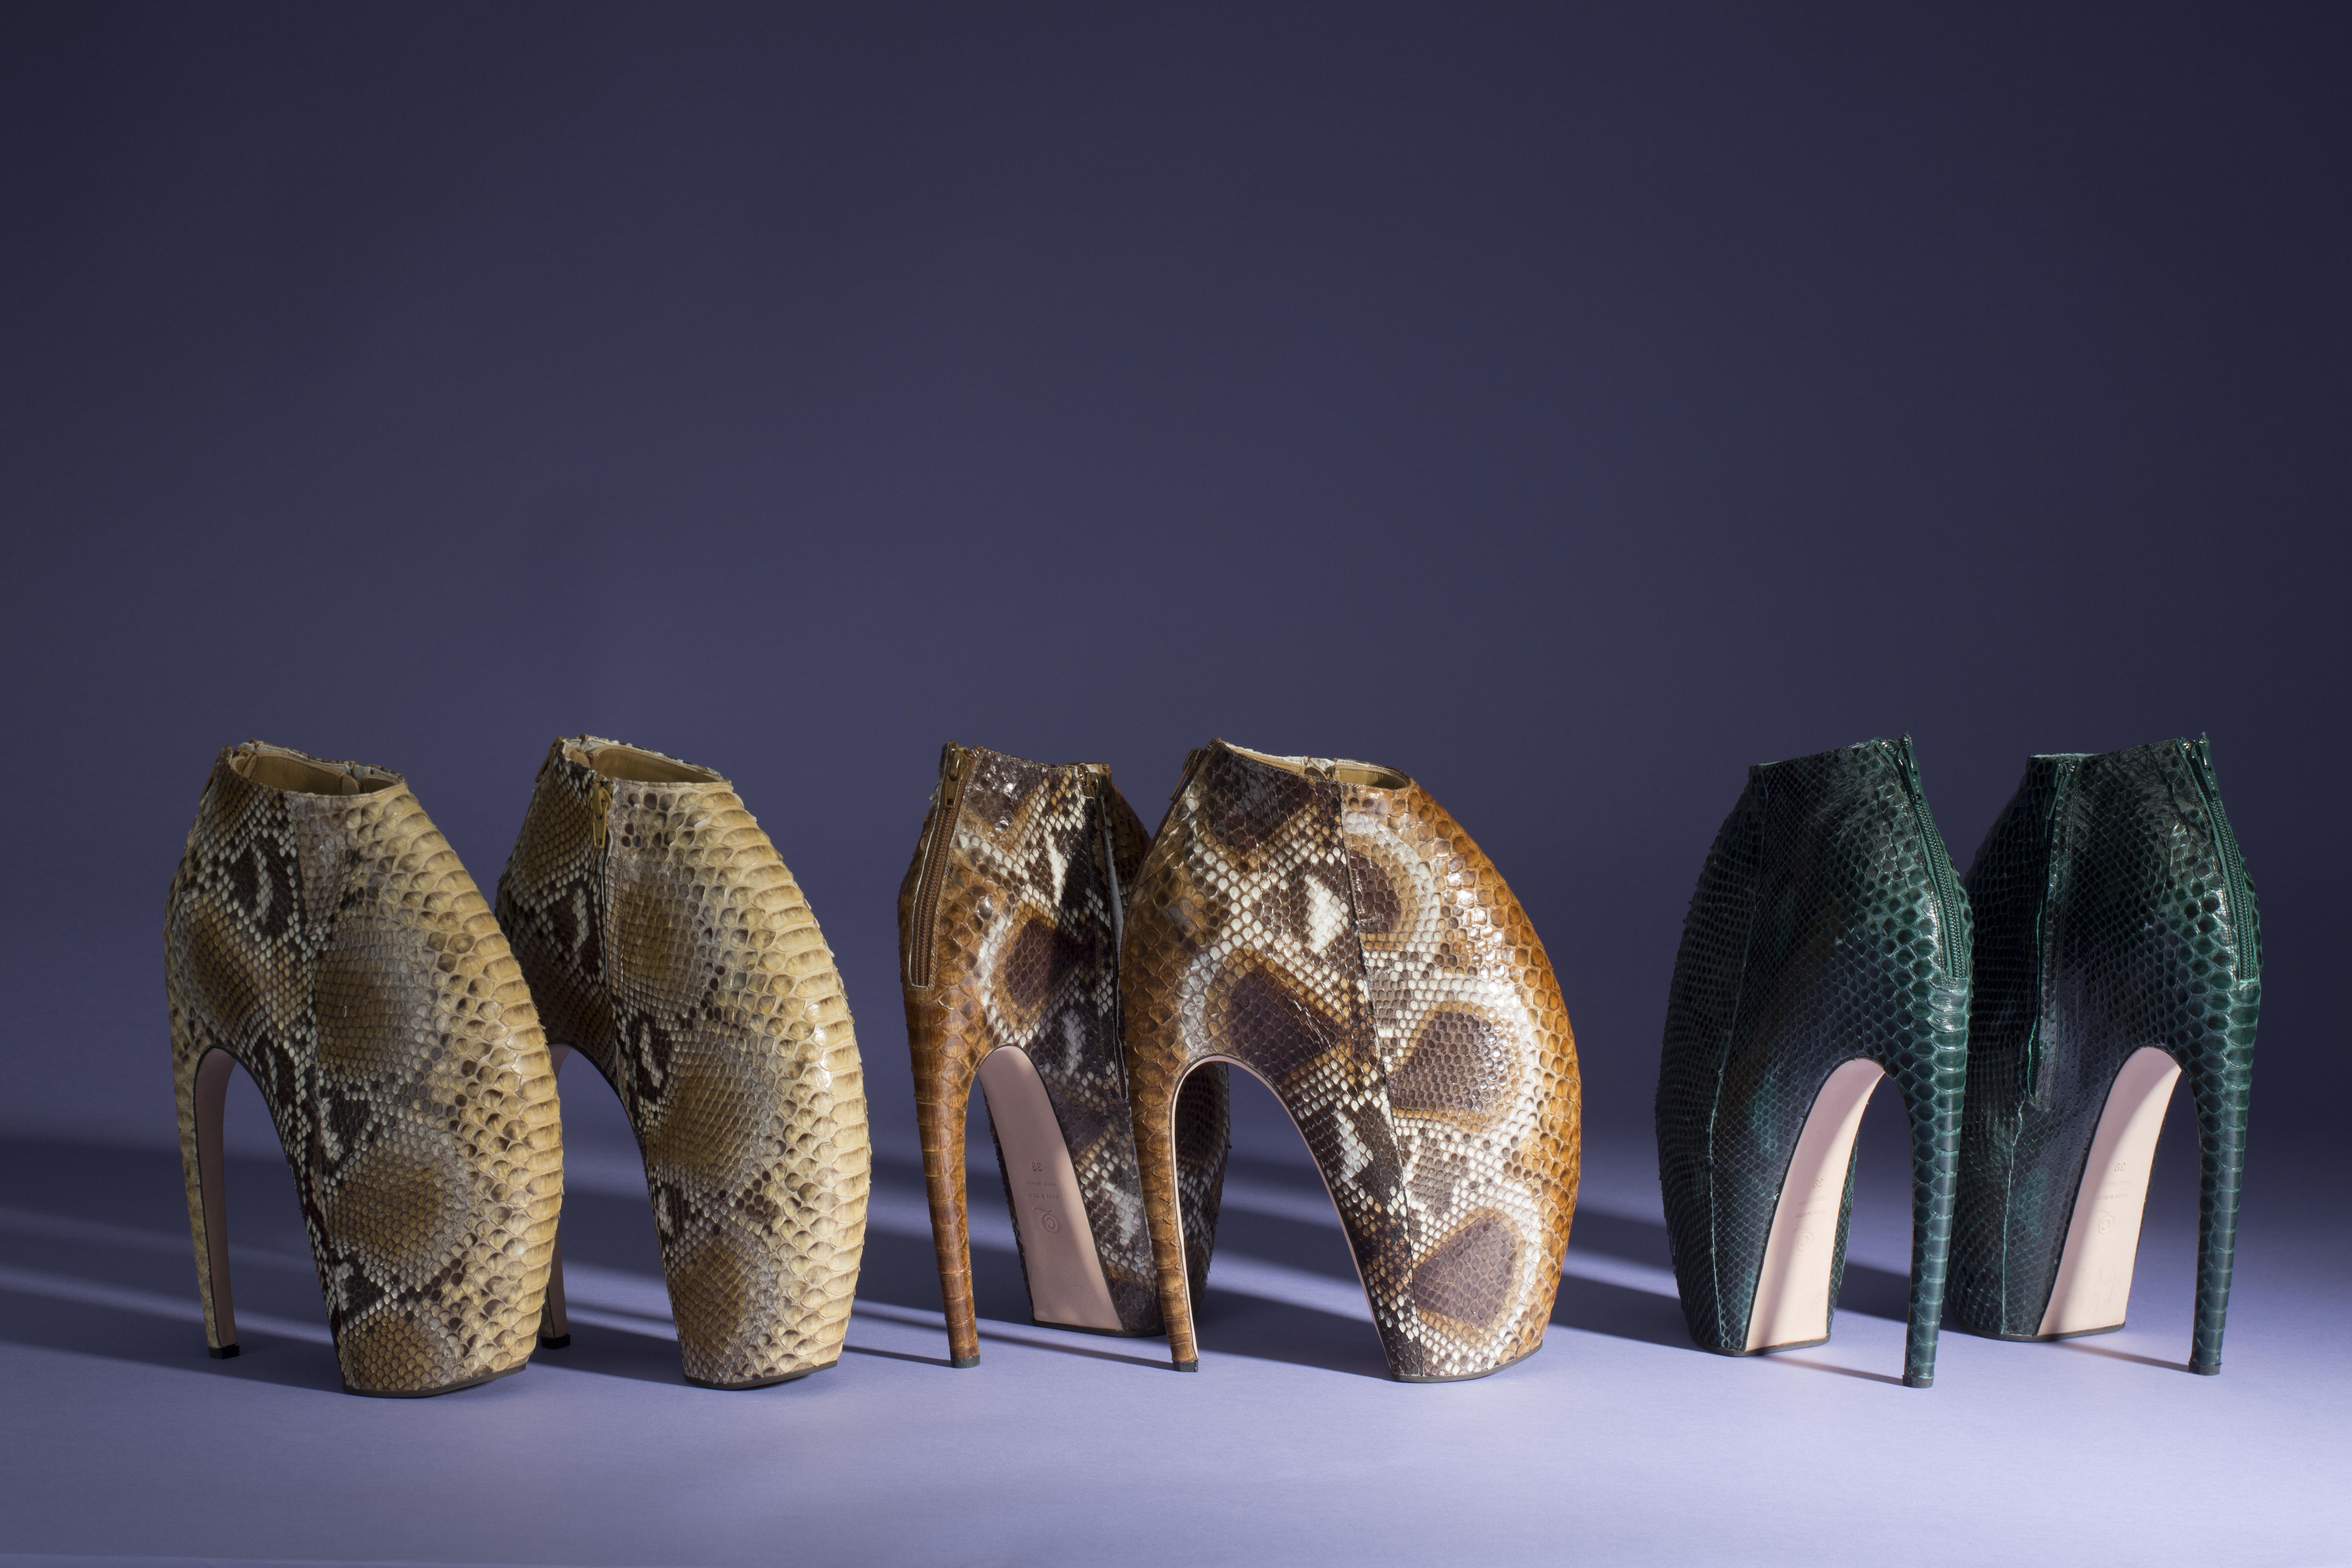 Christies to auction Alexander McQueen armadillo boots for charity